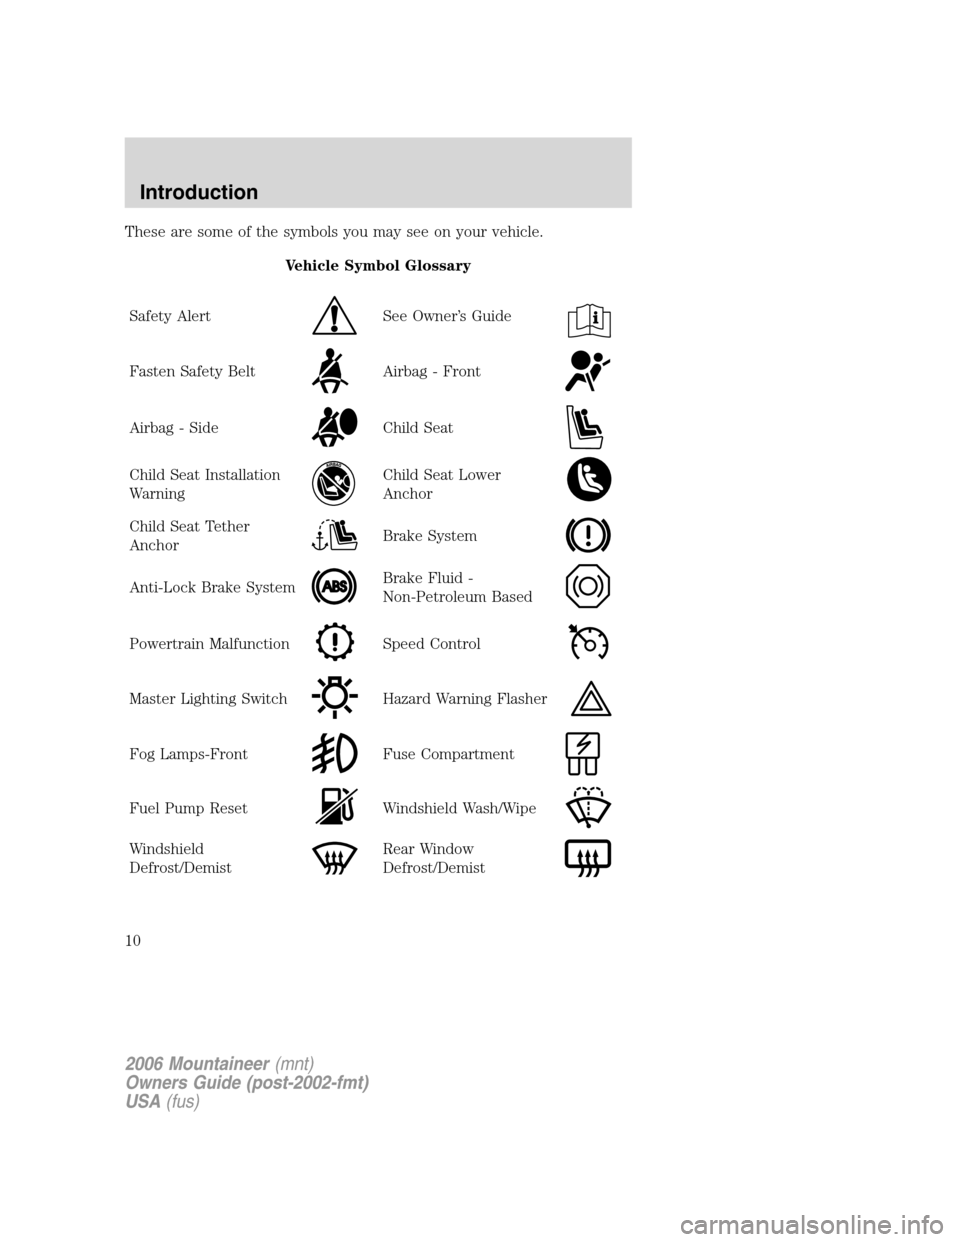 Mercury Mountaineer 2006  Owners Manuals These are some of the symbols you may see on your vehicle.
Vehicle Symbol Glossary
Safety Alert
See Owner’s Guide
Fasten Safety BeltAirbag - Front
Airbag - SideChild Seat
Child Seat Installation
War